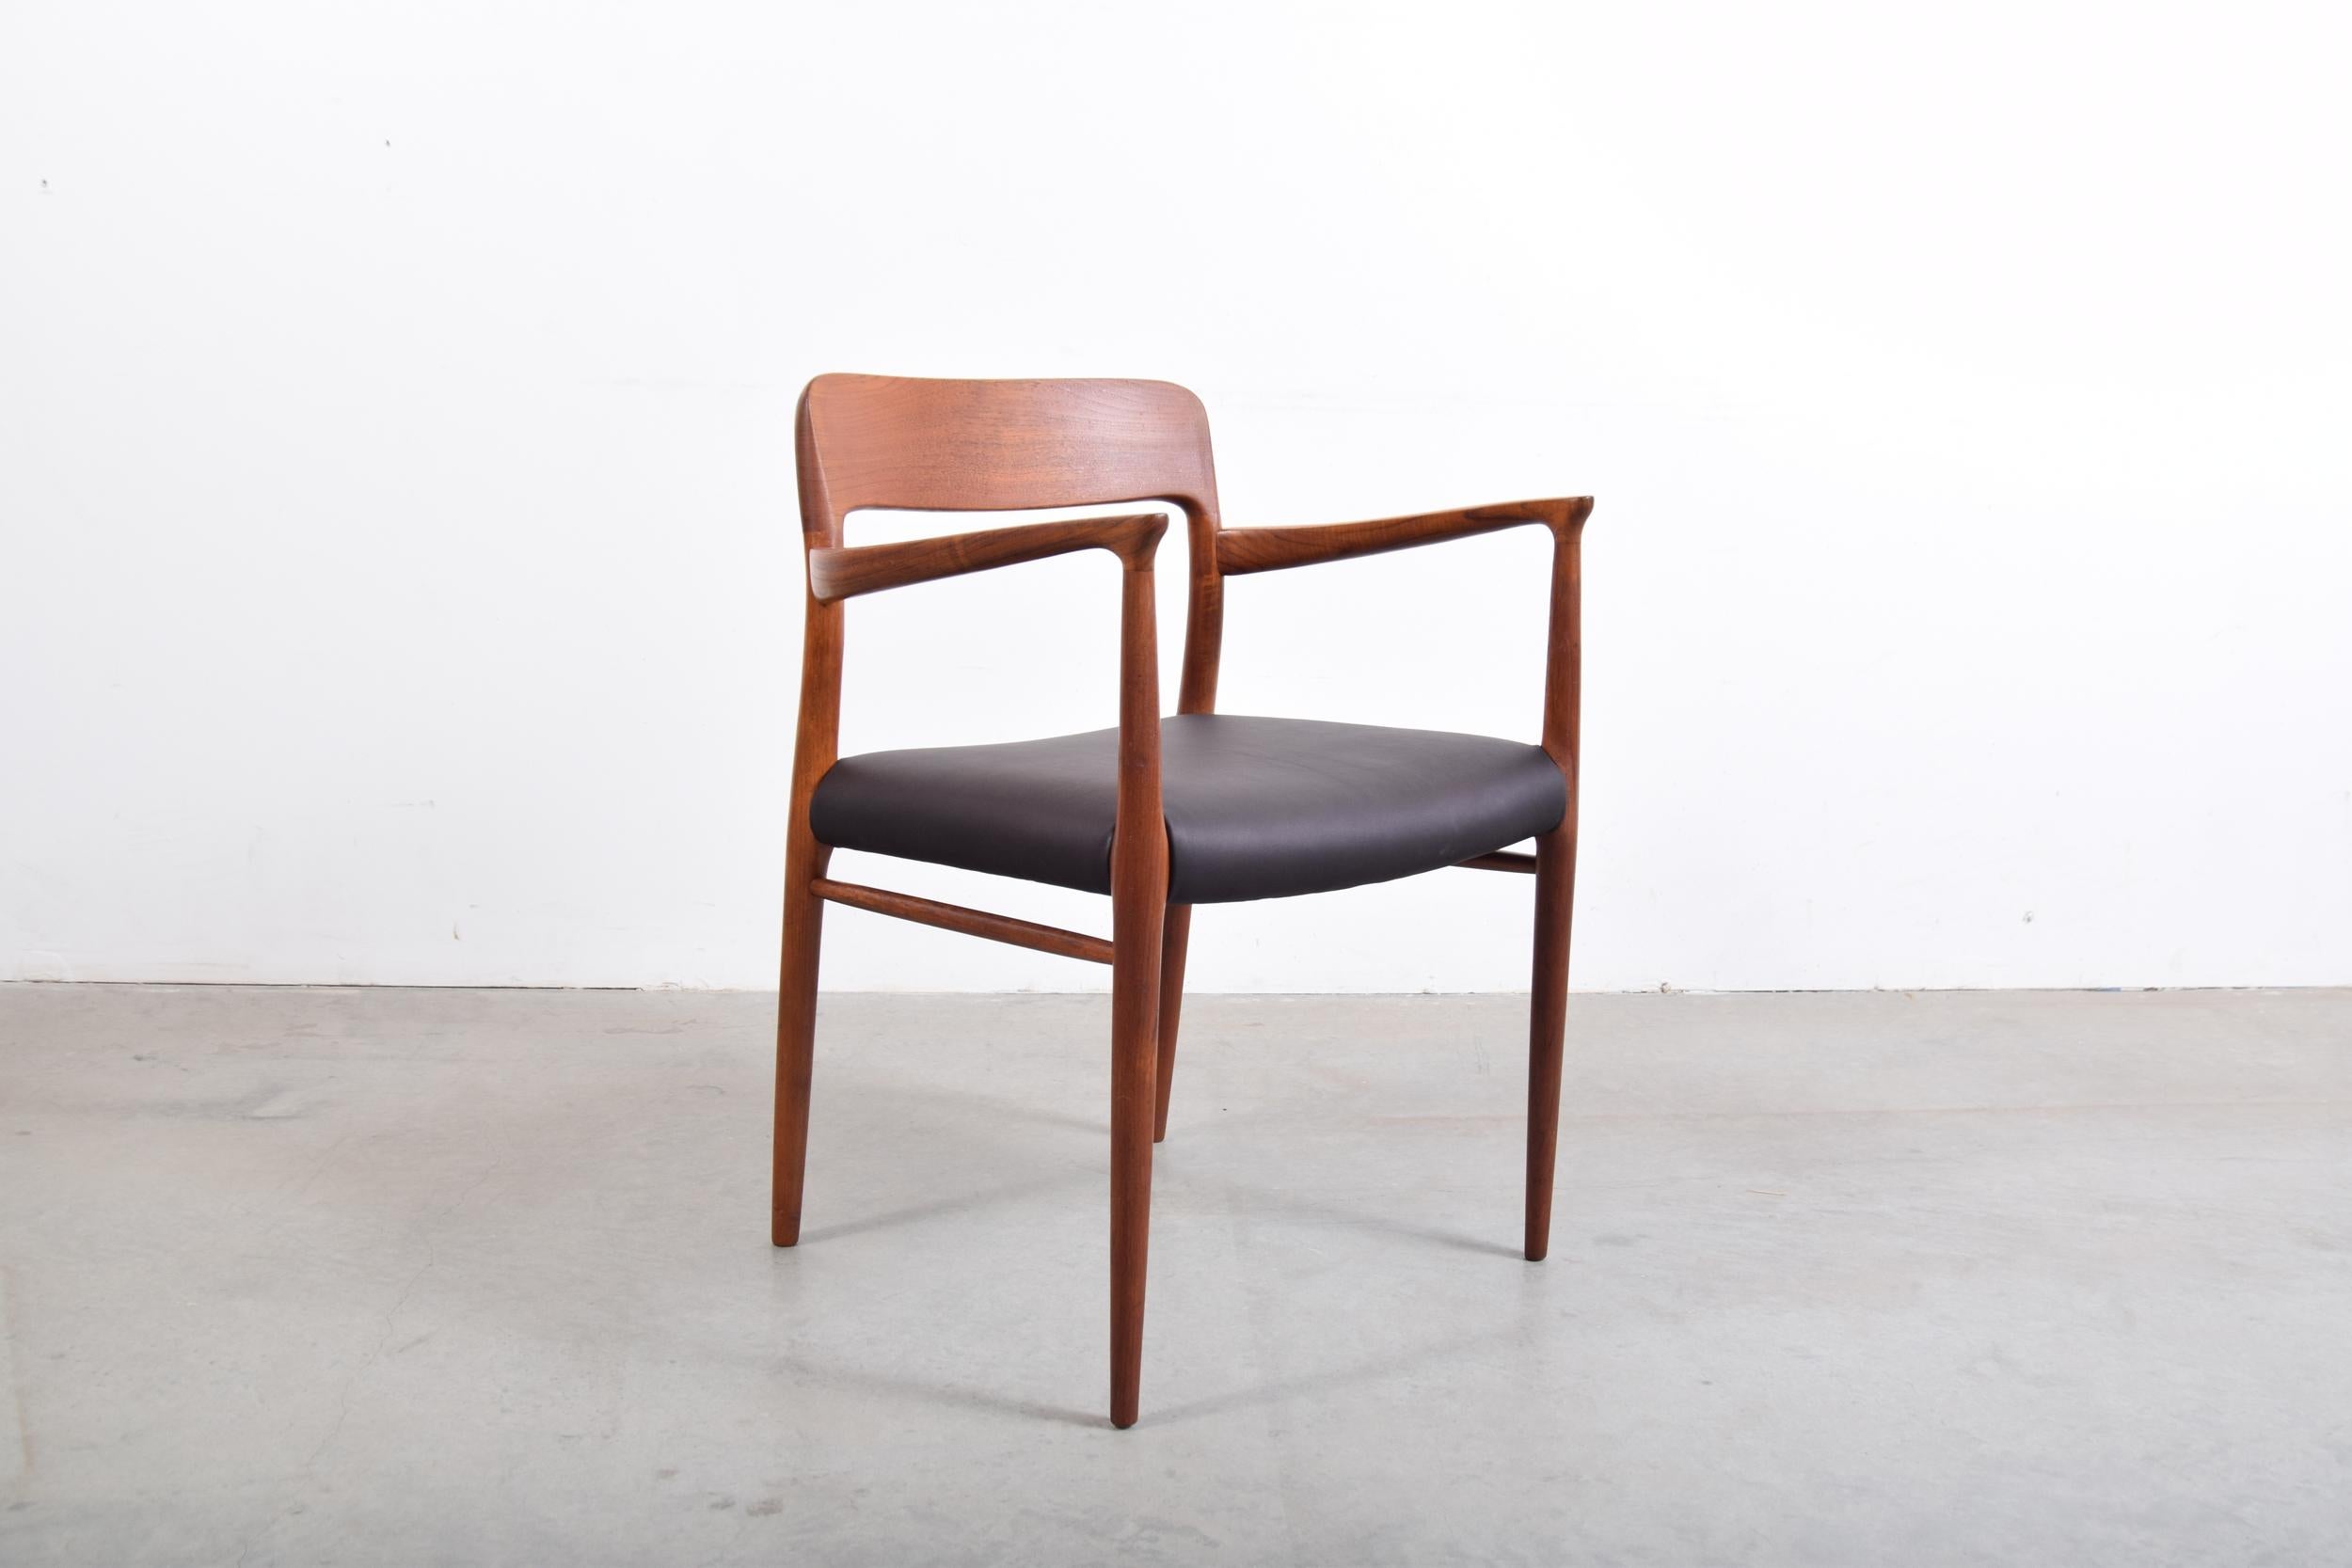 Niels Moller teak armchair, model 56, circa 1960, with black leather seat. Solid teak frame with newly upholstered seat in Edelman leather. Measure: 22.5